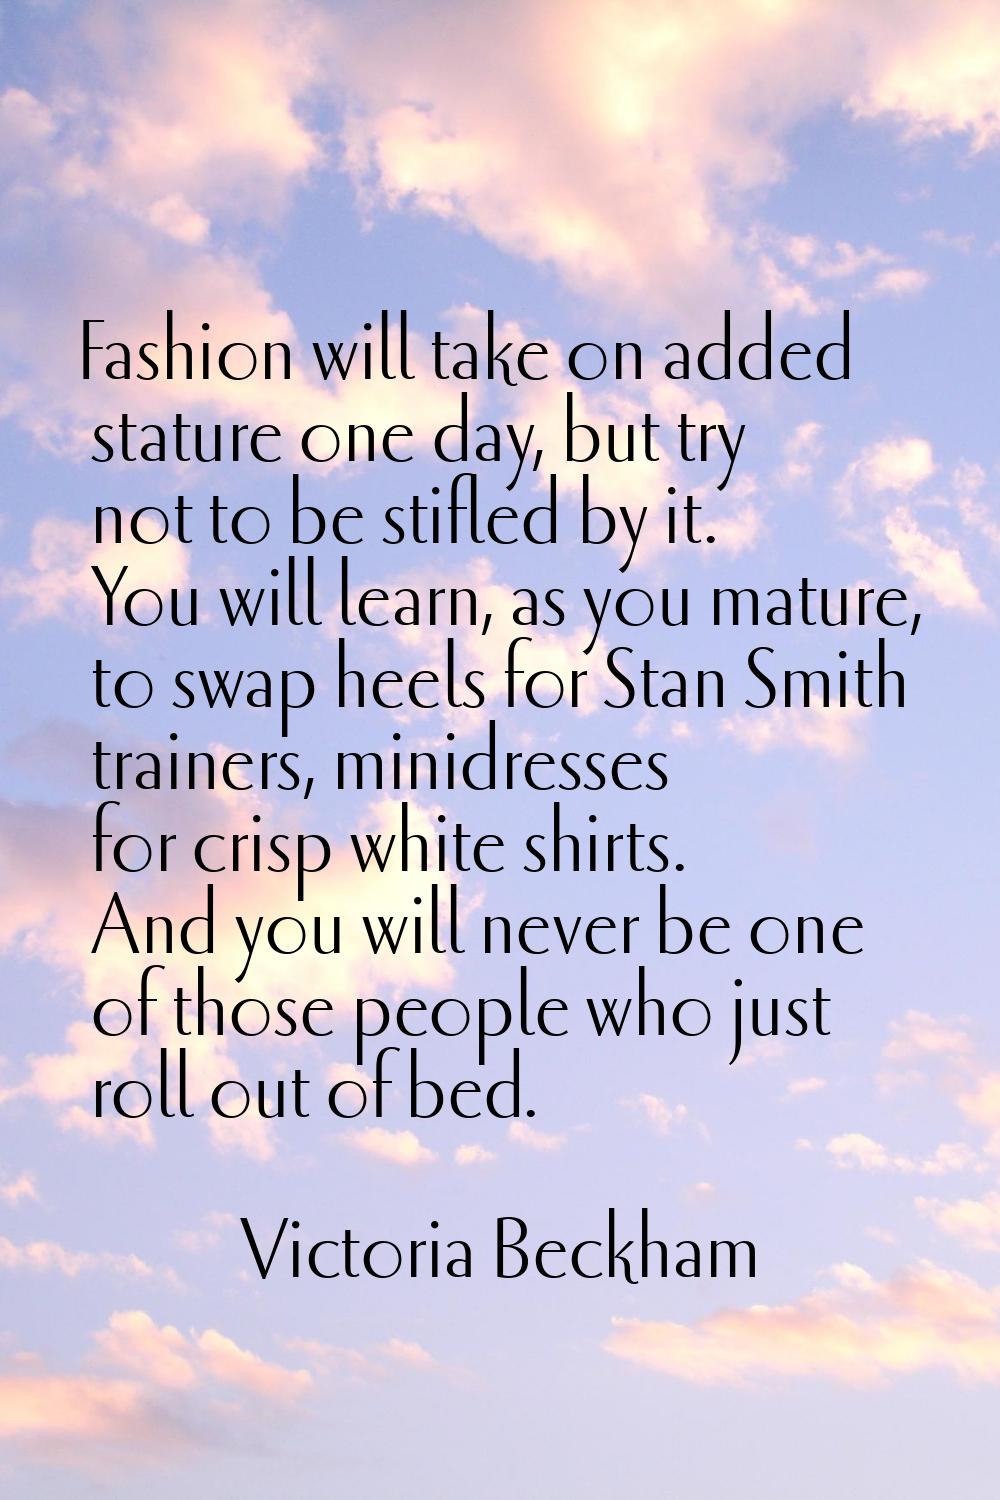 Fashion will take on added stature one day, but try not to be stifled by it. You will learn, as you